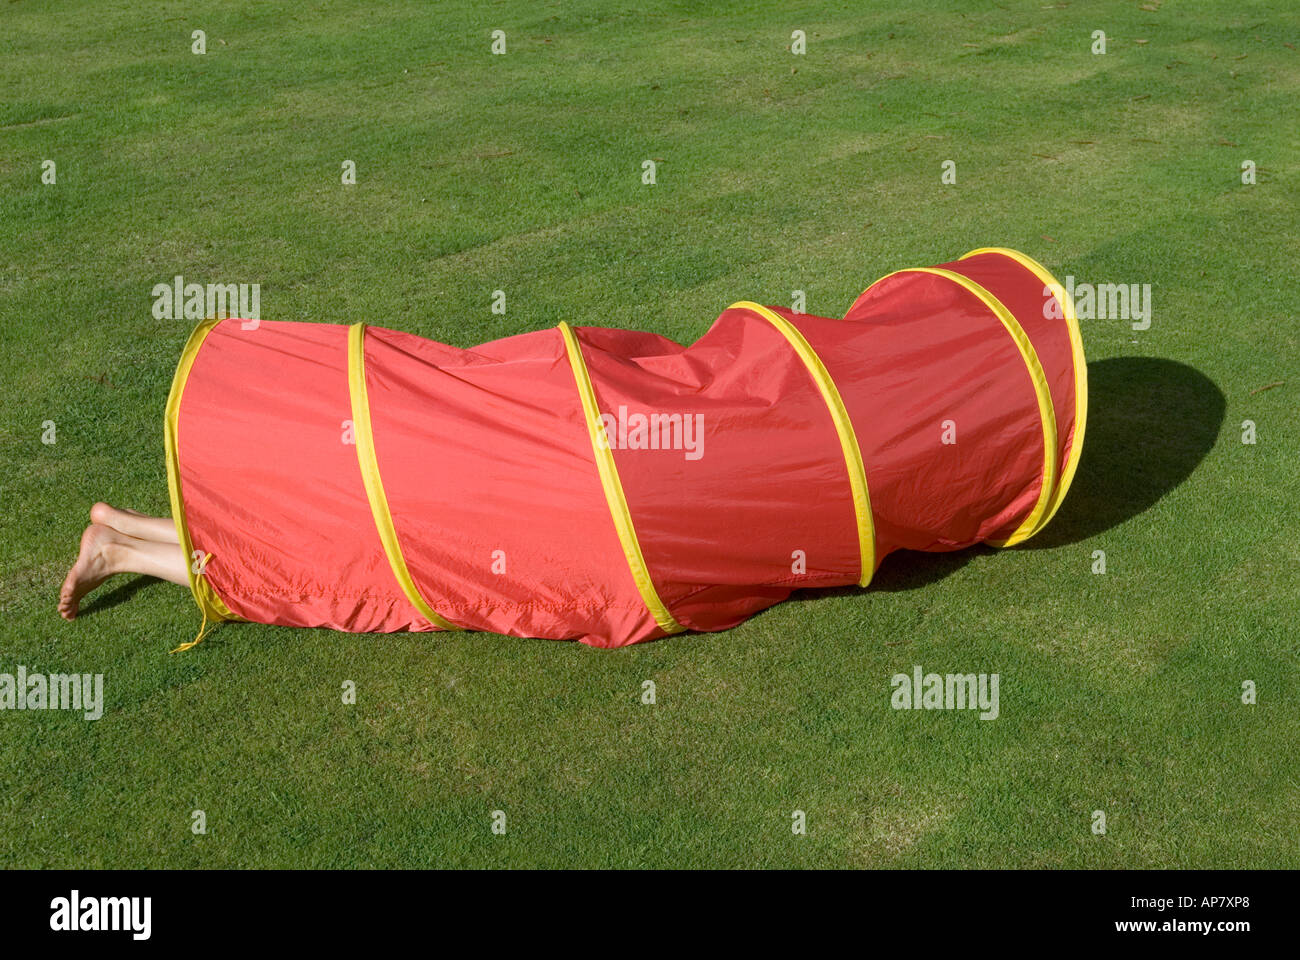 red play tunnel on grass lawn with child's feet sticking out Stock Photo